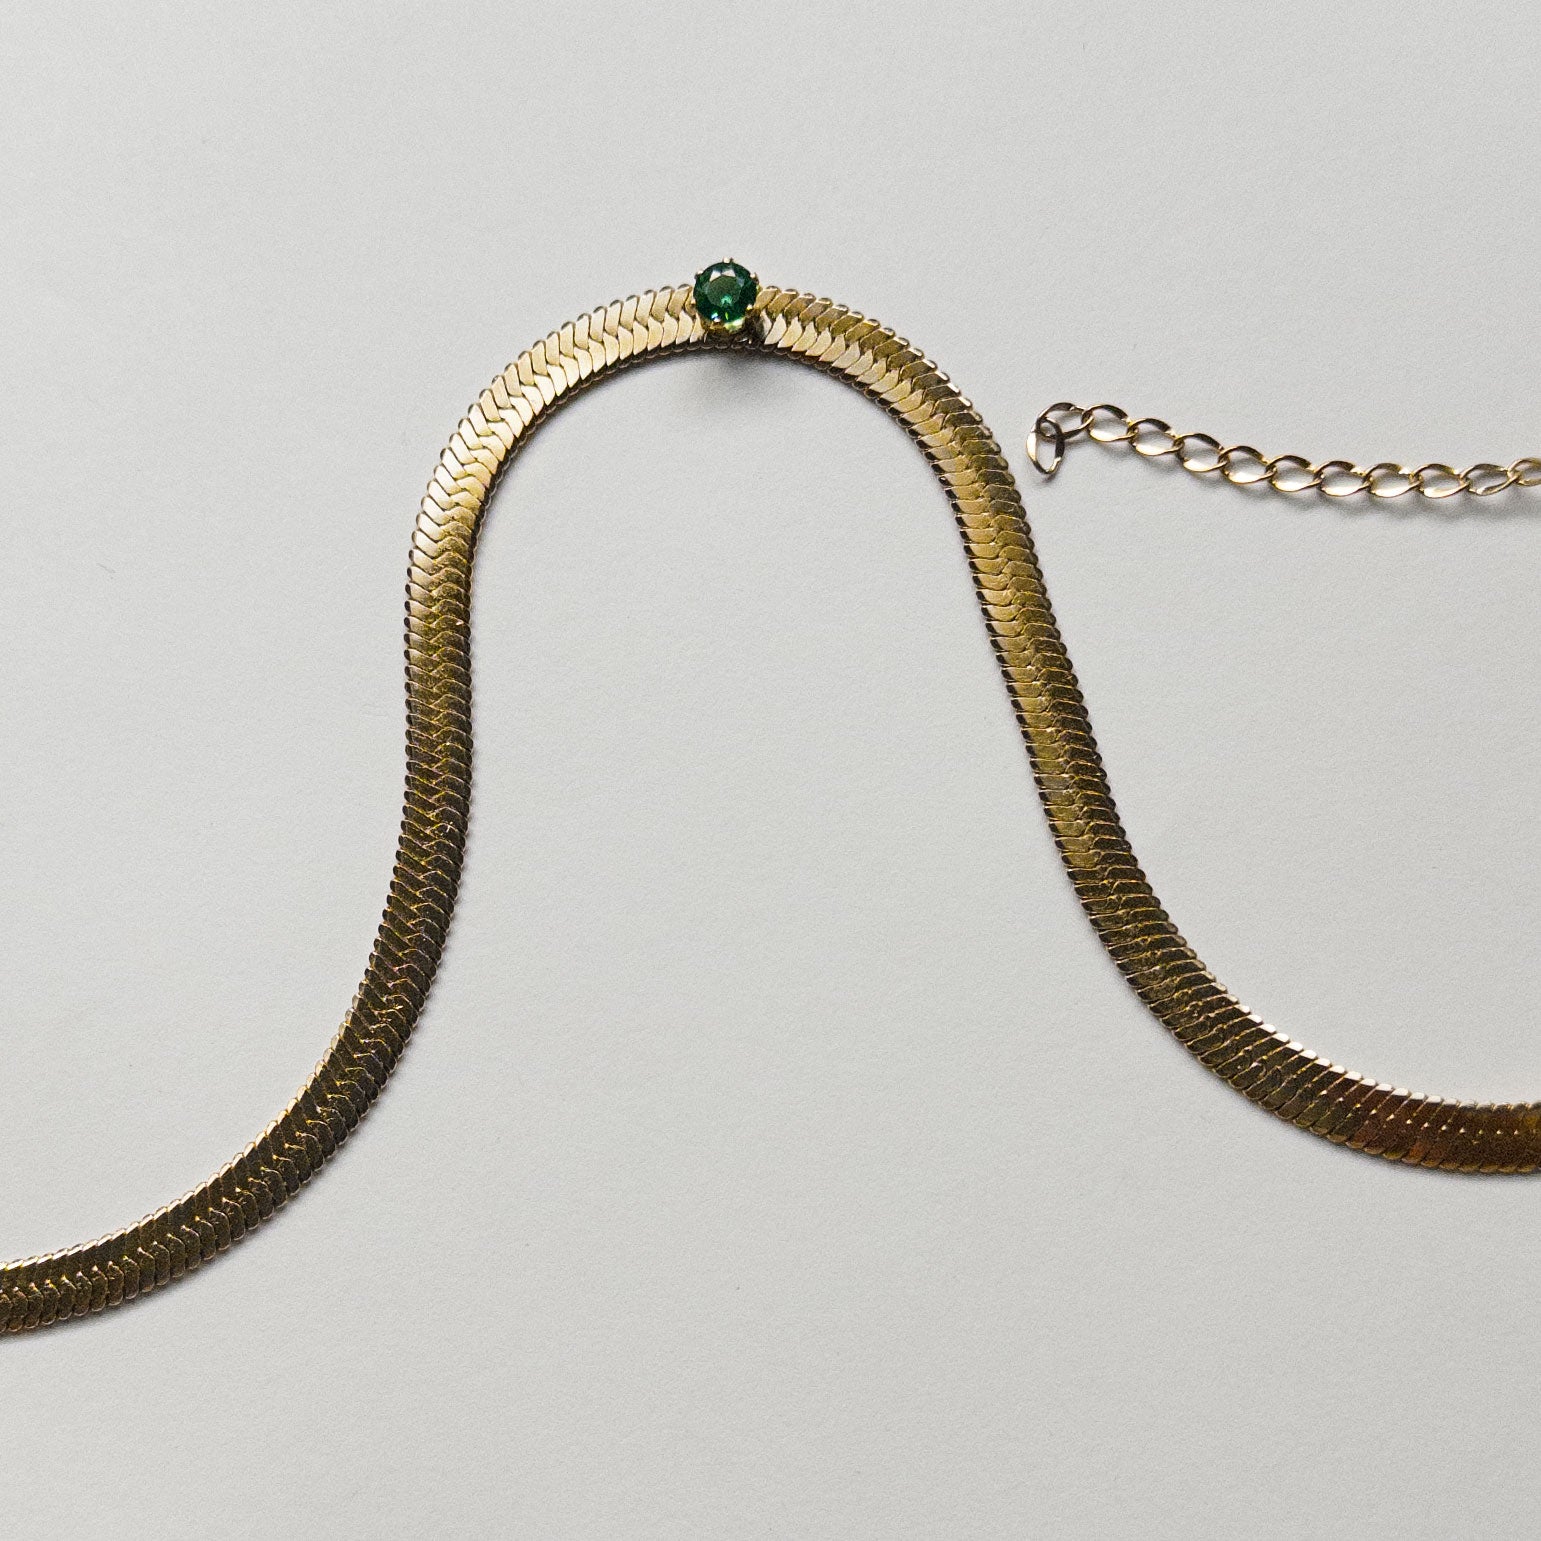 Stainless steel gold colored snake chain choker/necklace featuring a sage green cubic zirconia gem in the center.